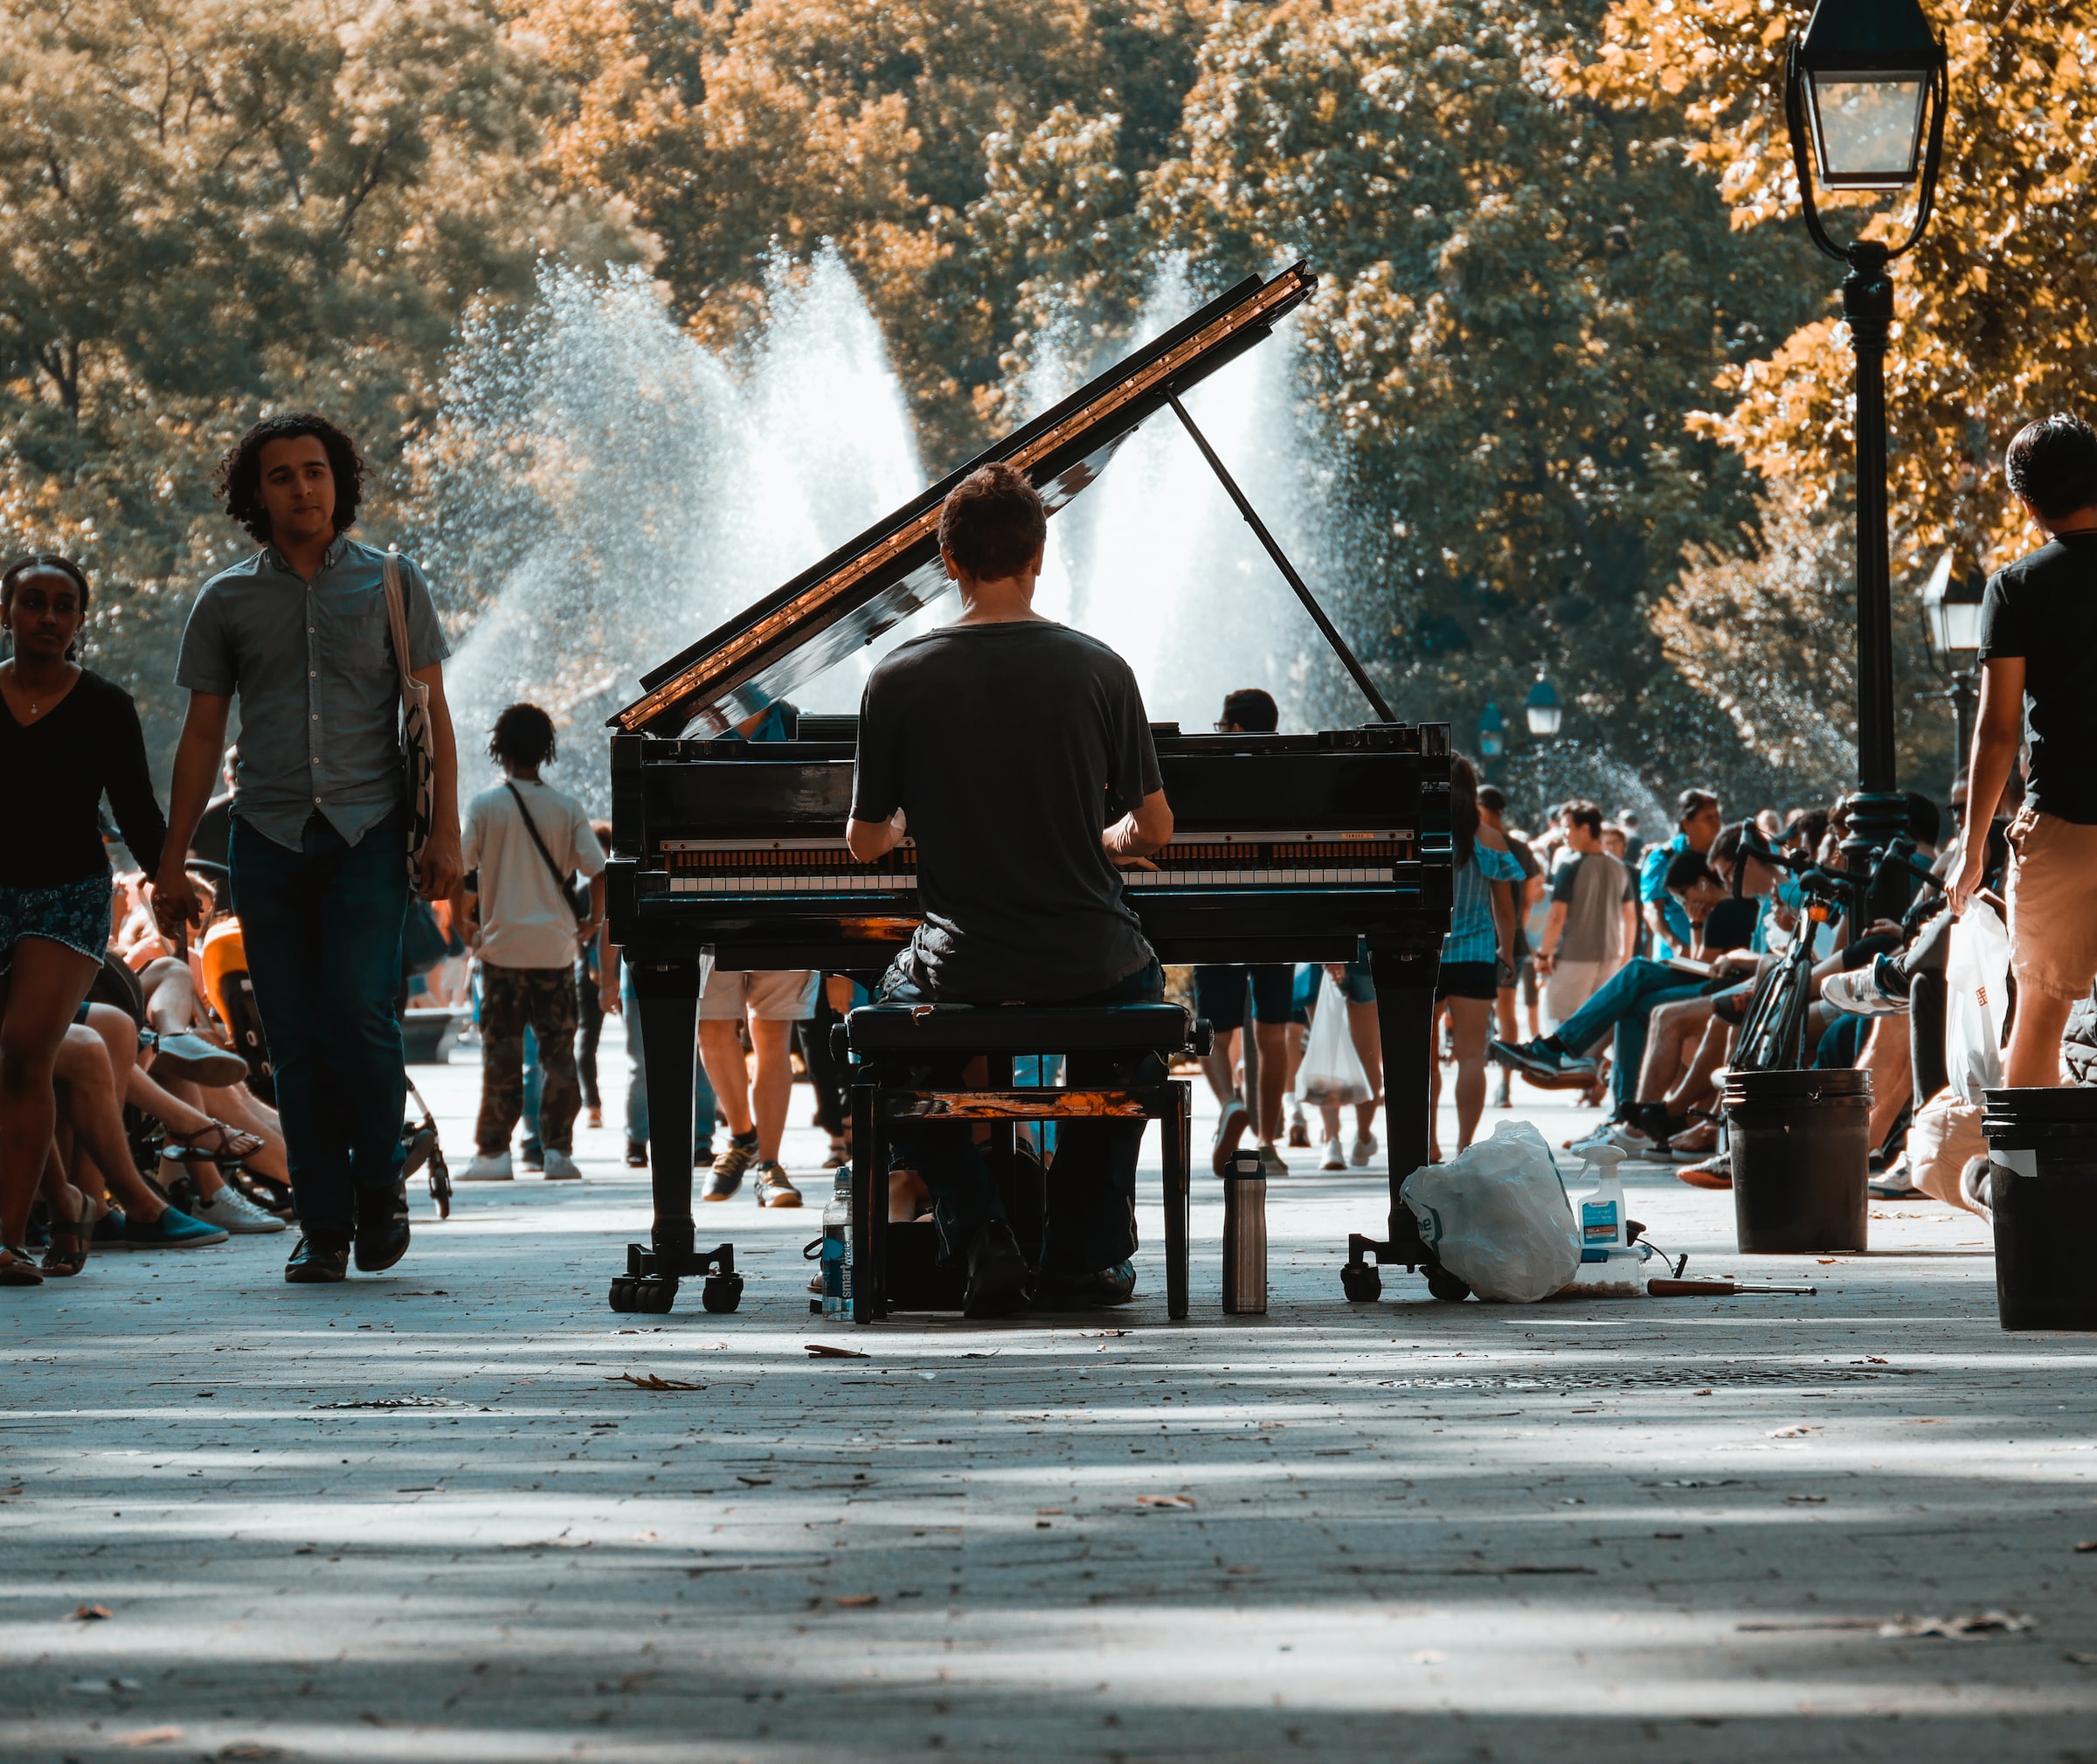 Man playing piano in street